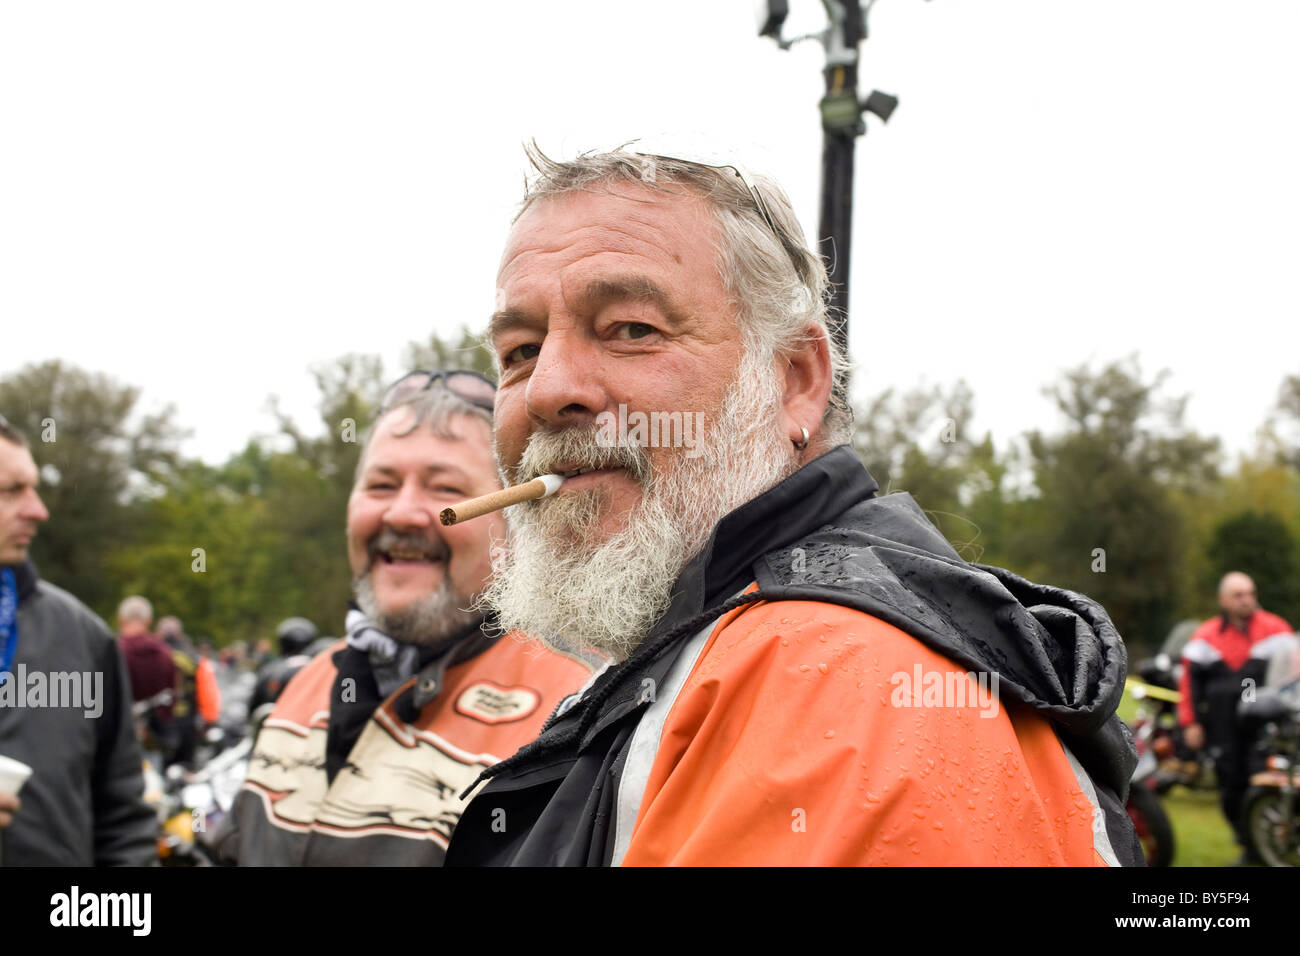 Motorcycle riders wait for the start of the annual autumn charity ride in Adams Massachusetts. Stock Photo